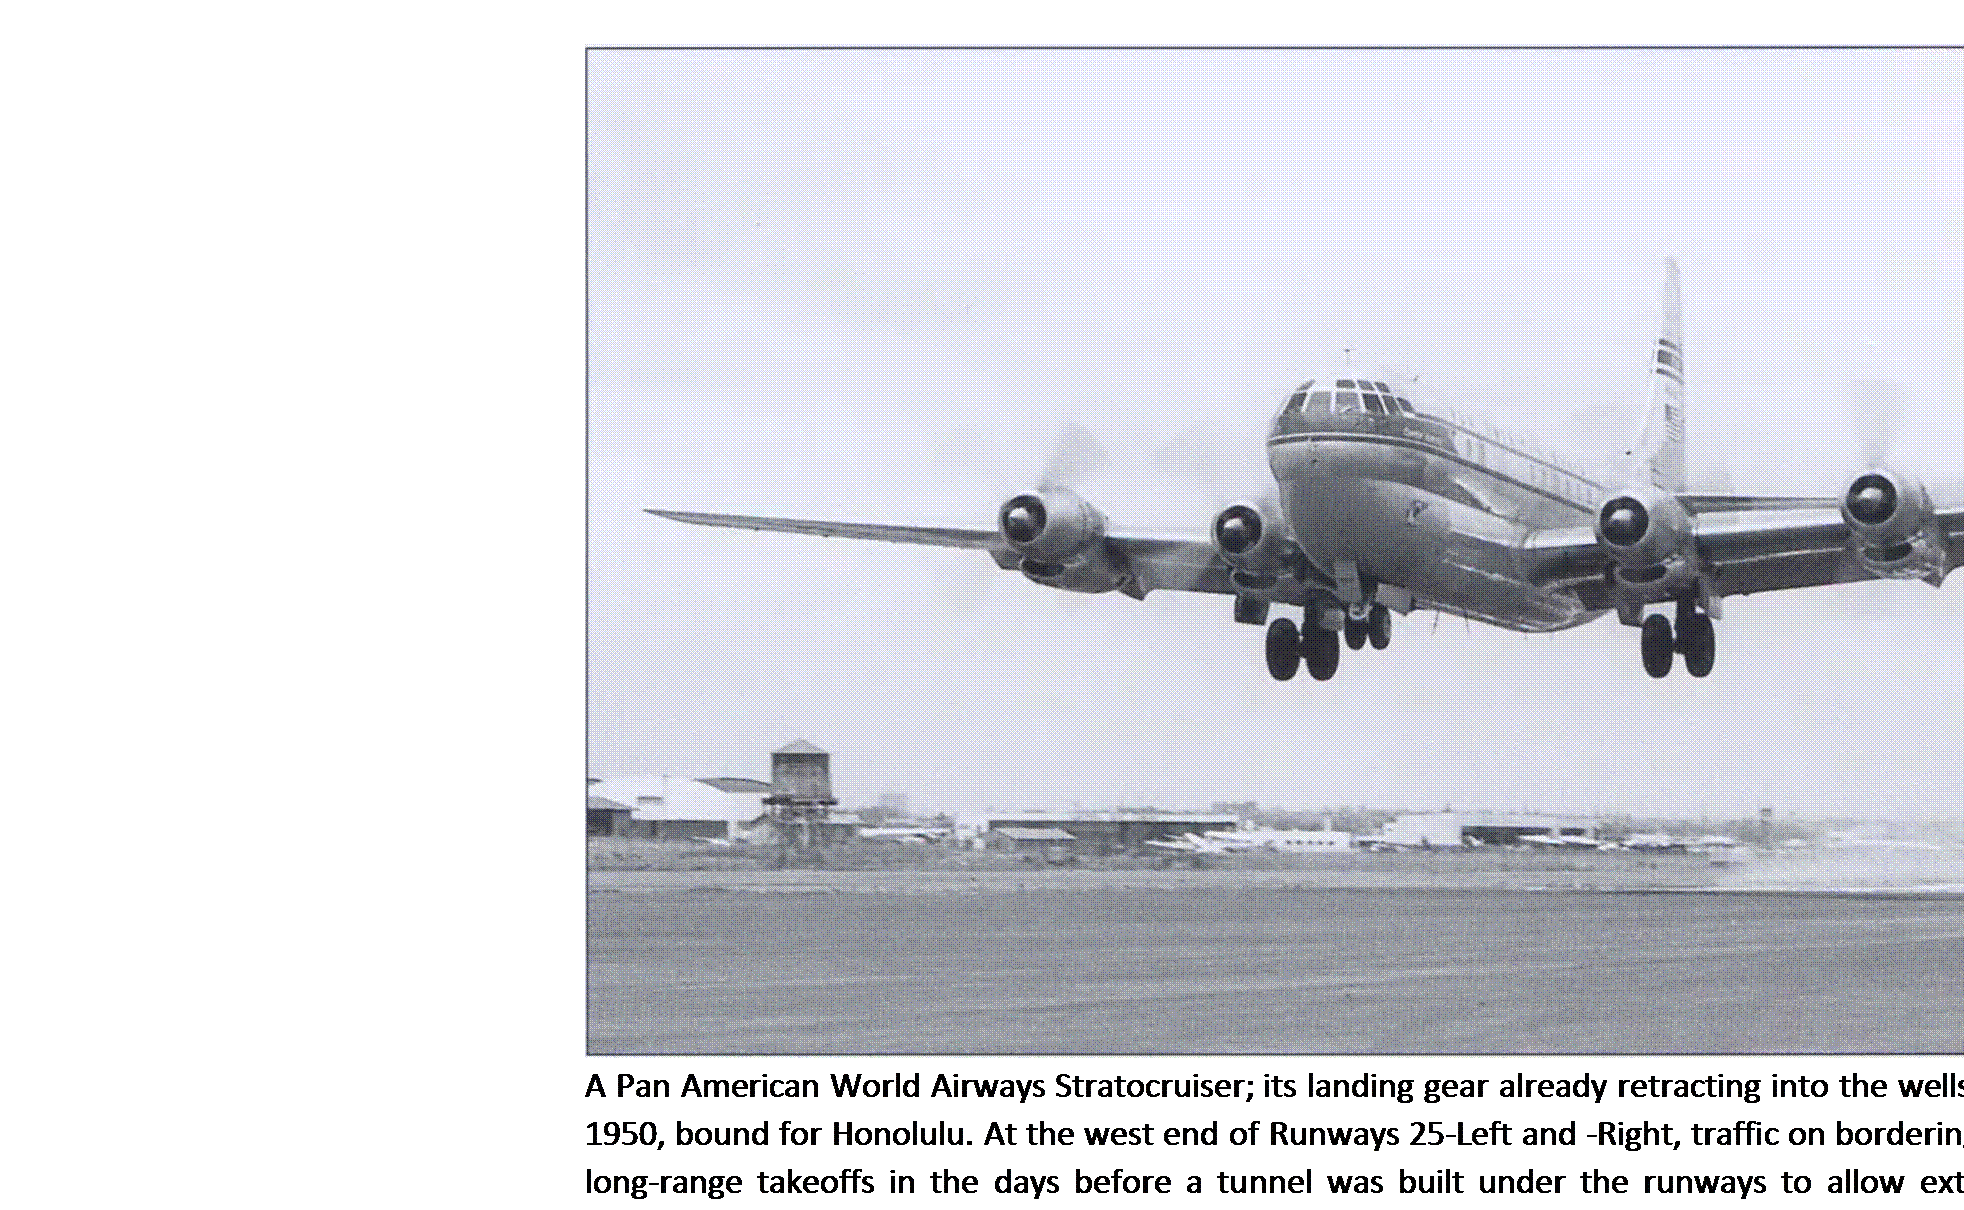 Подпись: A Pan American World Airways Stratocruiser; its landing gear already retracting into the wells, departs from Los Angeles on June 23, 1950, bound for Honolulu. At the west end of Runways 25-Left and -Right, traffic on bordering Sepulveda Boulevard was stopped for long-range takeoffs in the days before a tunnel was built under the runways to allow extension of the strips. The Stratocruiser remains to this day the most successful adaptation of a military transport (the C-97) into a luxury airliner. (Los Angeles World Airports) 